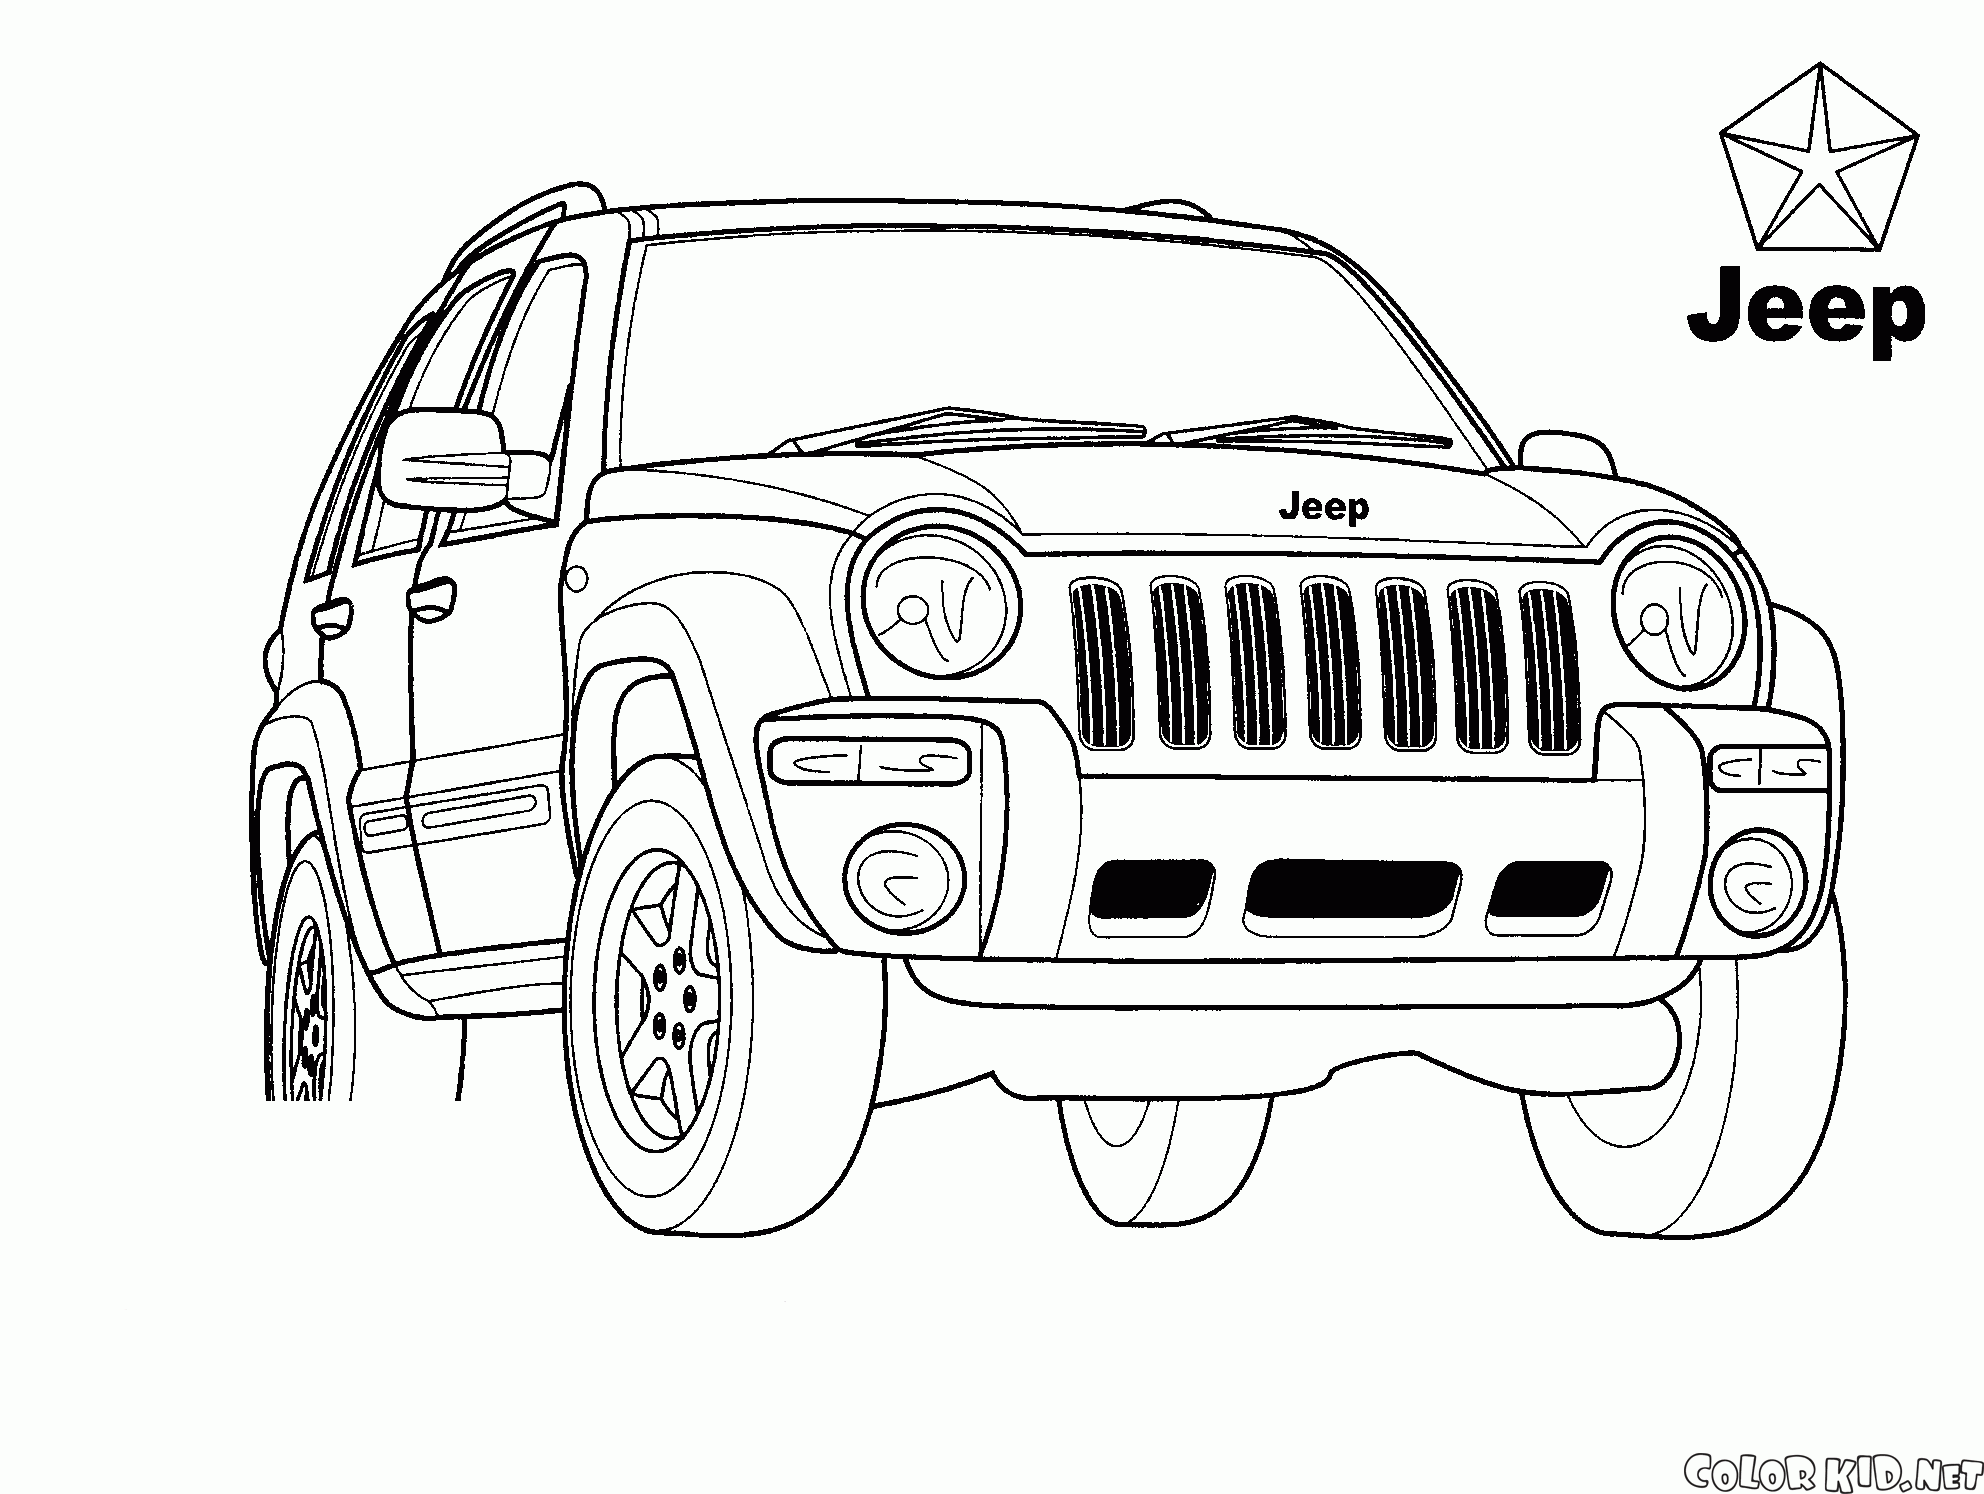 Coloring page - Universal Jeep